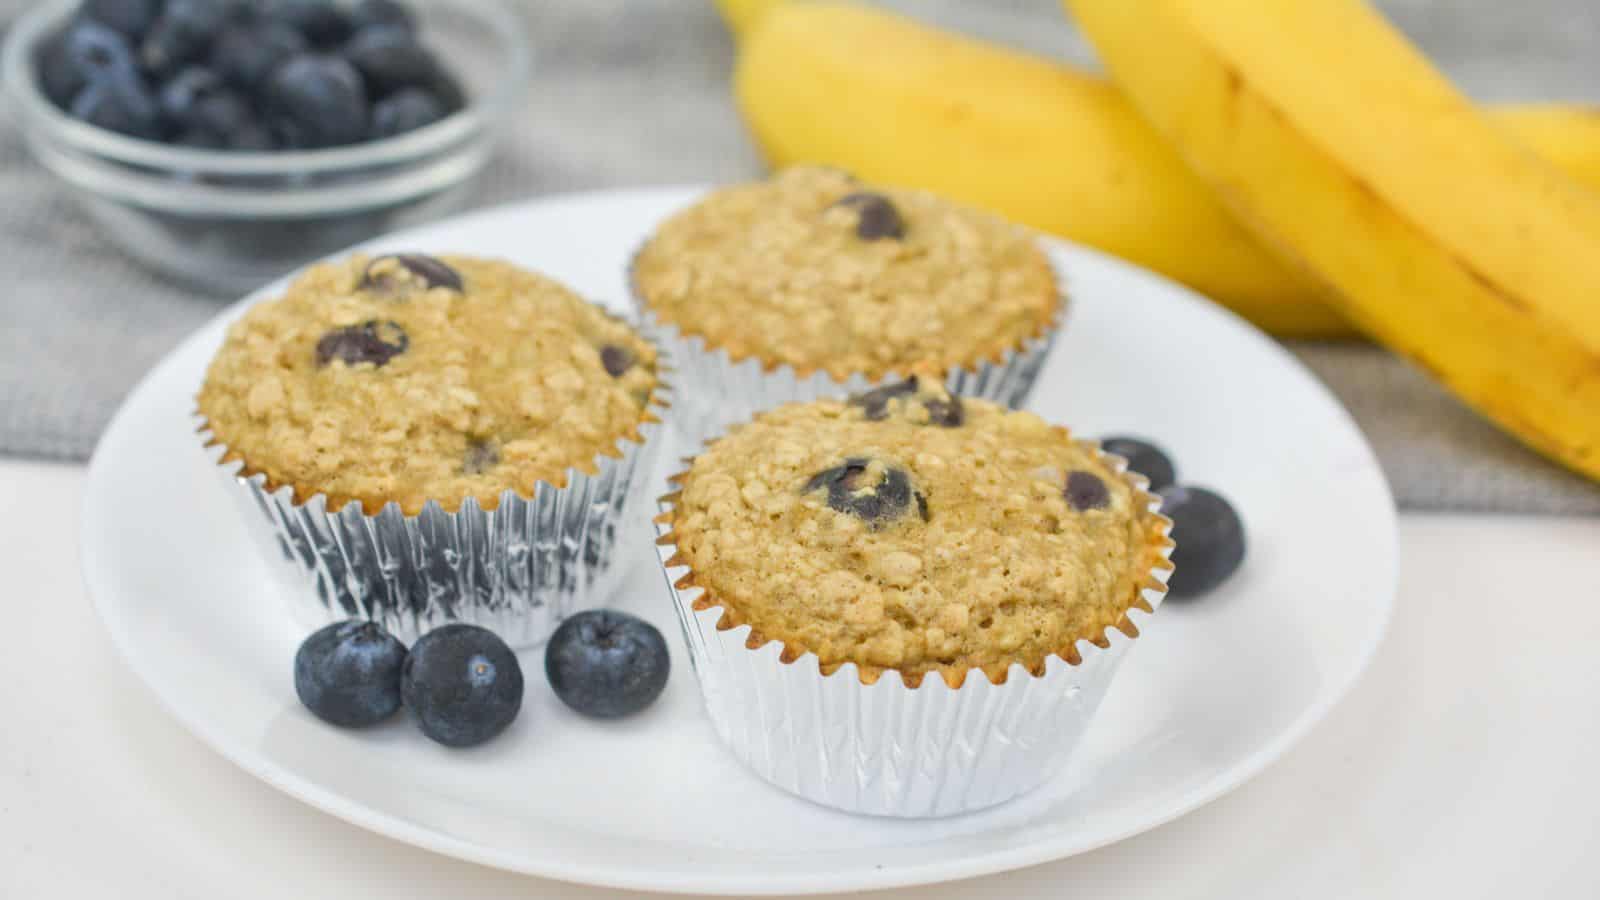 Three blueberry banana muffins on a white plate, with fresh blueberries and bananas in the background.